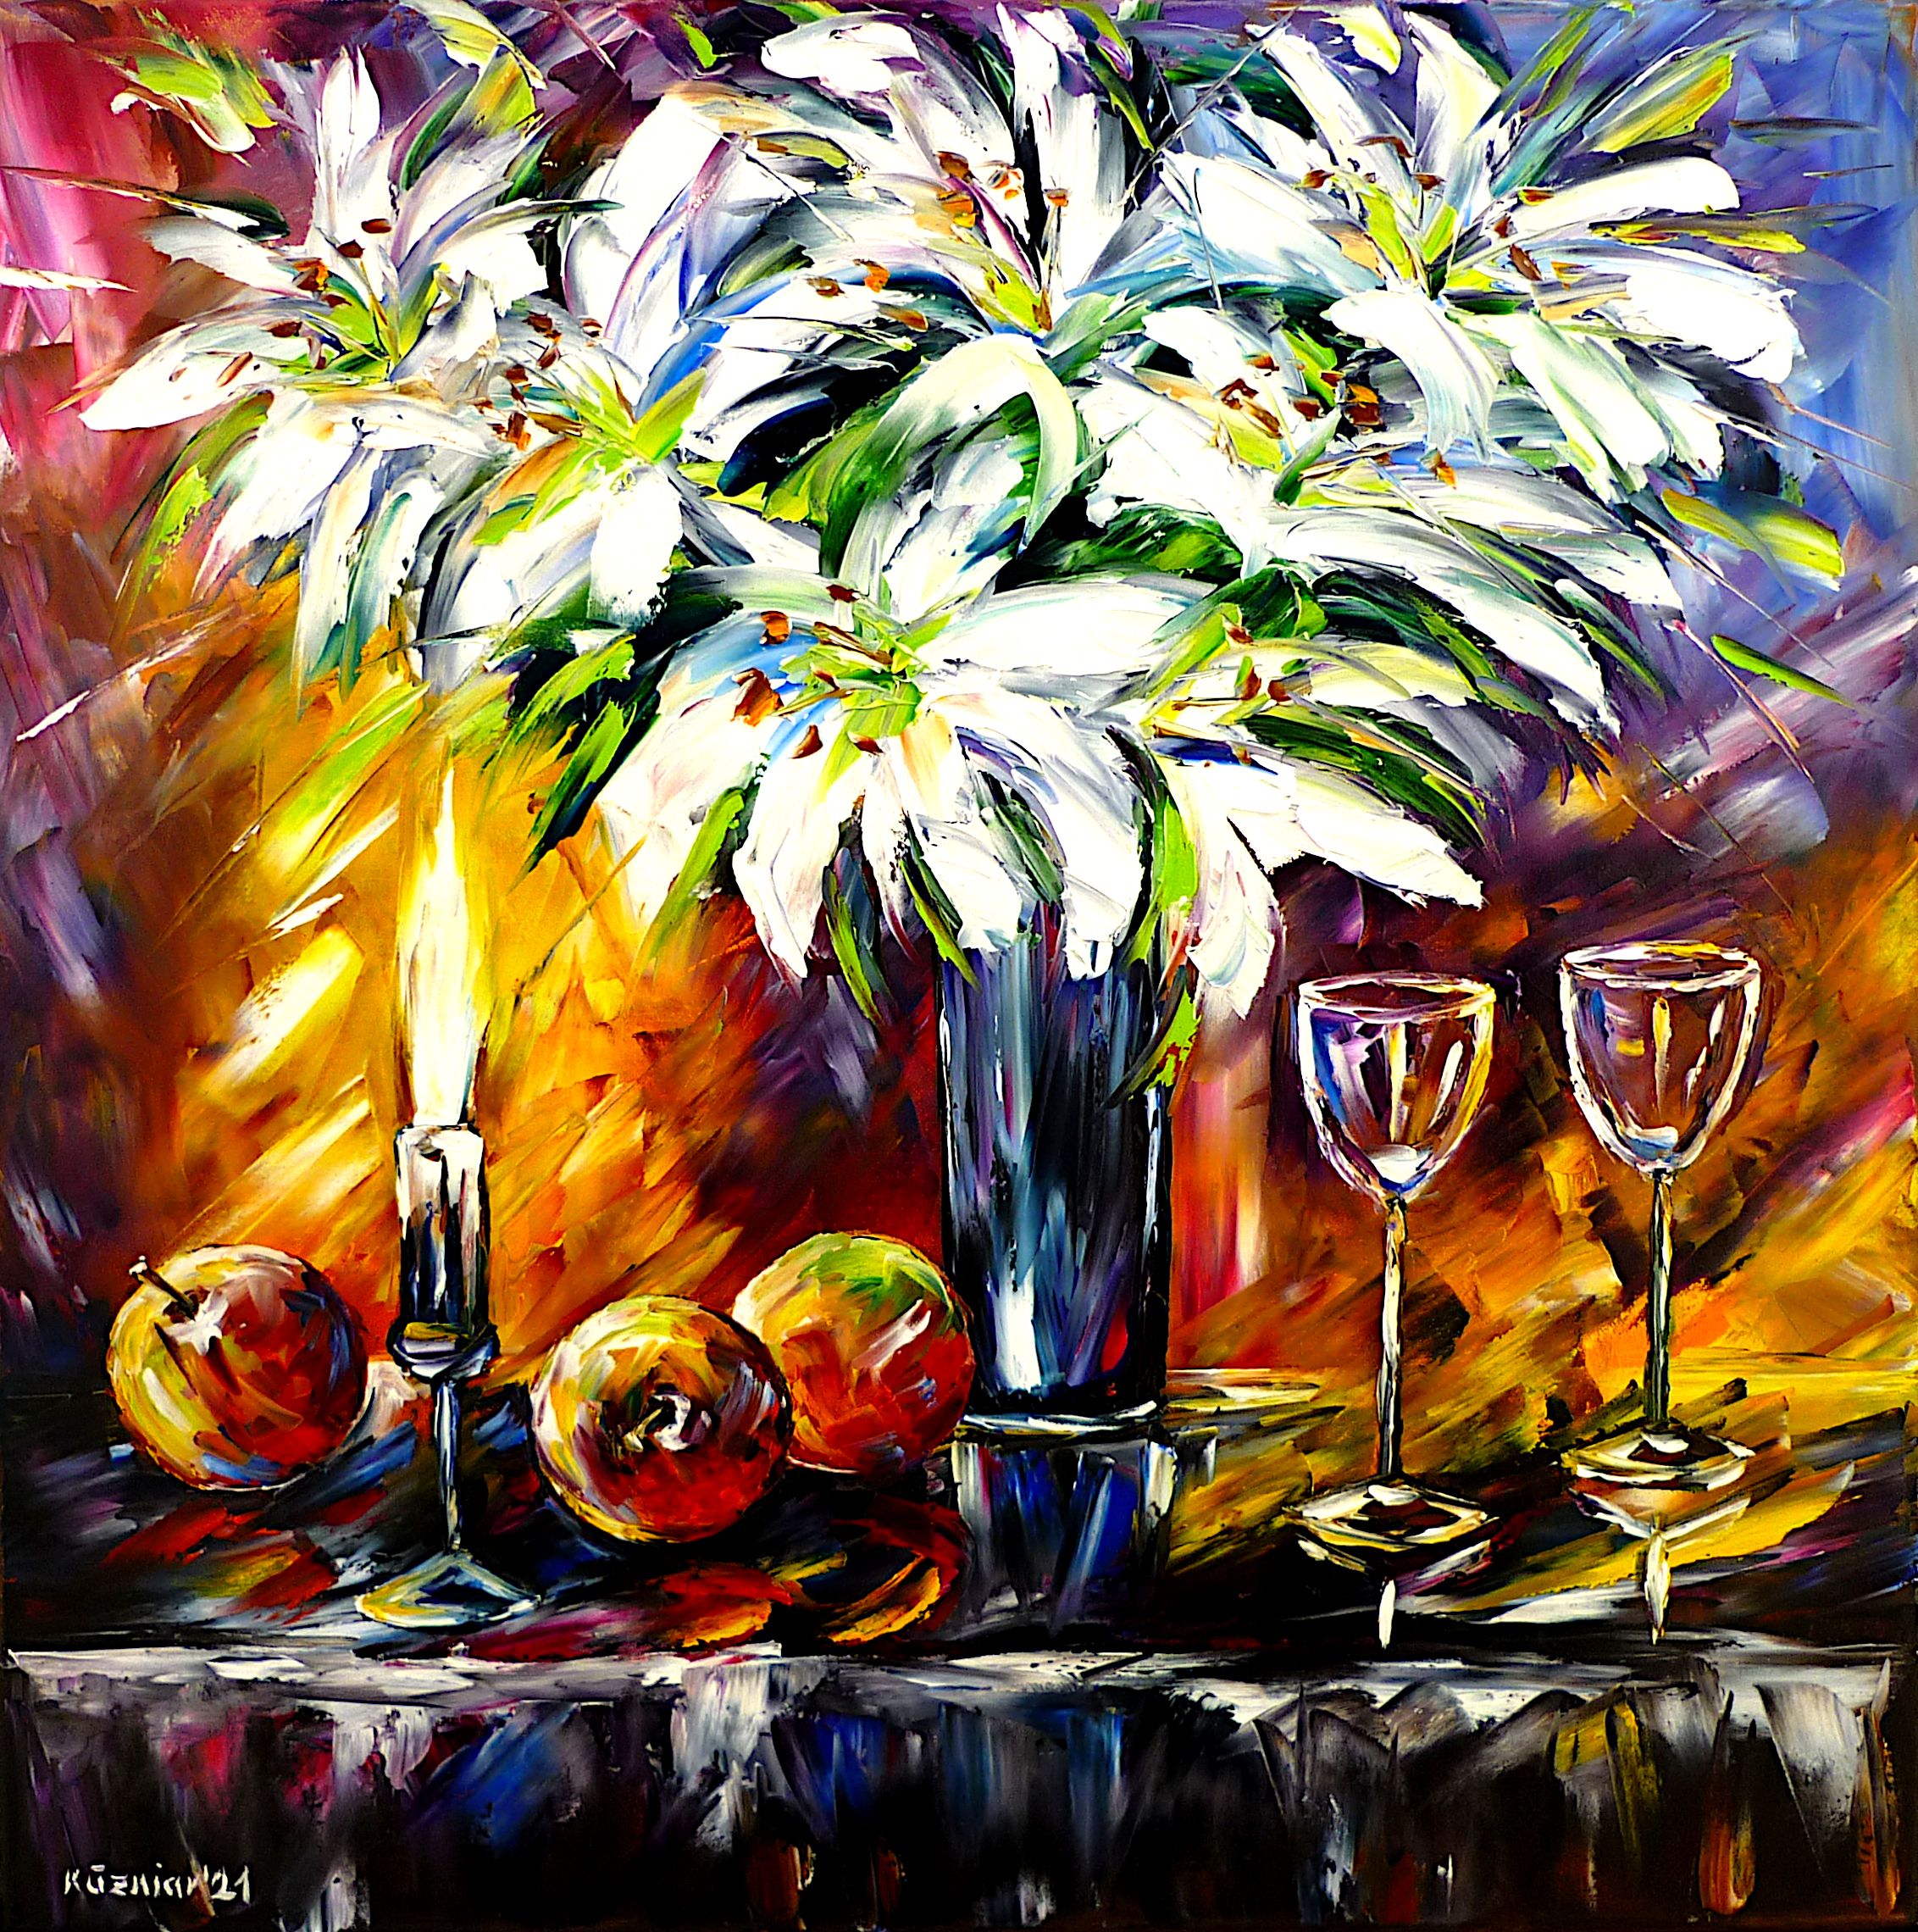 Fruit still life,apples and flowers,floral still life,white flowers,flowers in vase,lily bouquet,flower bouquet,lily fragrance,floral fragrance,lily love,flower love,burning candle,apple flower candle,floristry,lily painting,flower painting,square picture,square painting,square format,shot glasses,wine glasses,wine glass,dark still life painting,modern still life,colorful still life,still life with candle,candle on the table,romance,romantic picture,romantic painting,still life abstract,cheerful picture,joy,friendly picture,friendly painting,peaceful picture,peaceful painting,palette knife oil painting,modernart,figurative,impressionism,abstract painting,lively colors,colorful painting,bright colors,light reflections,impasto painting,dining room art,dining room picture,dining room painting